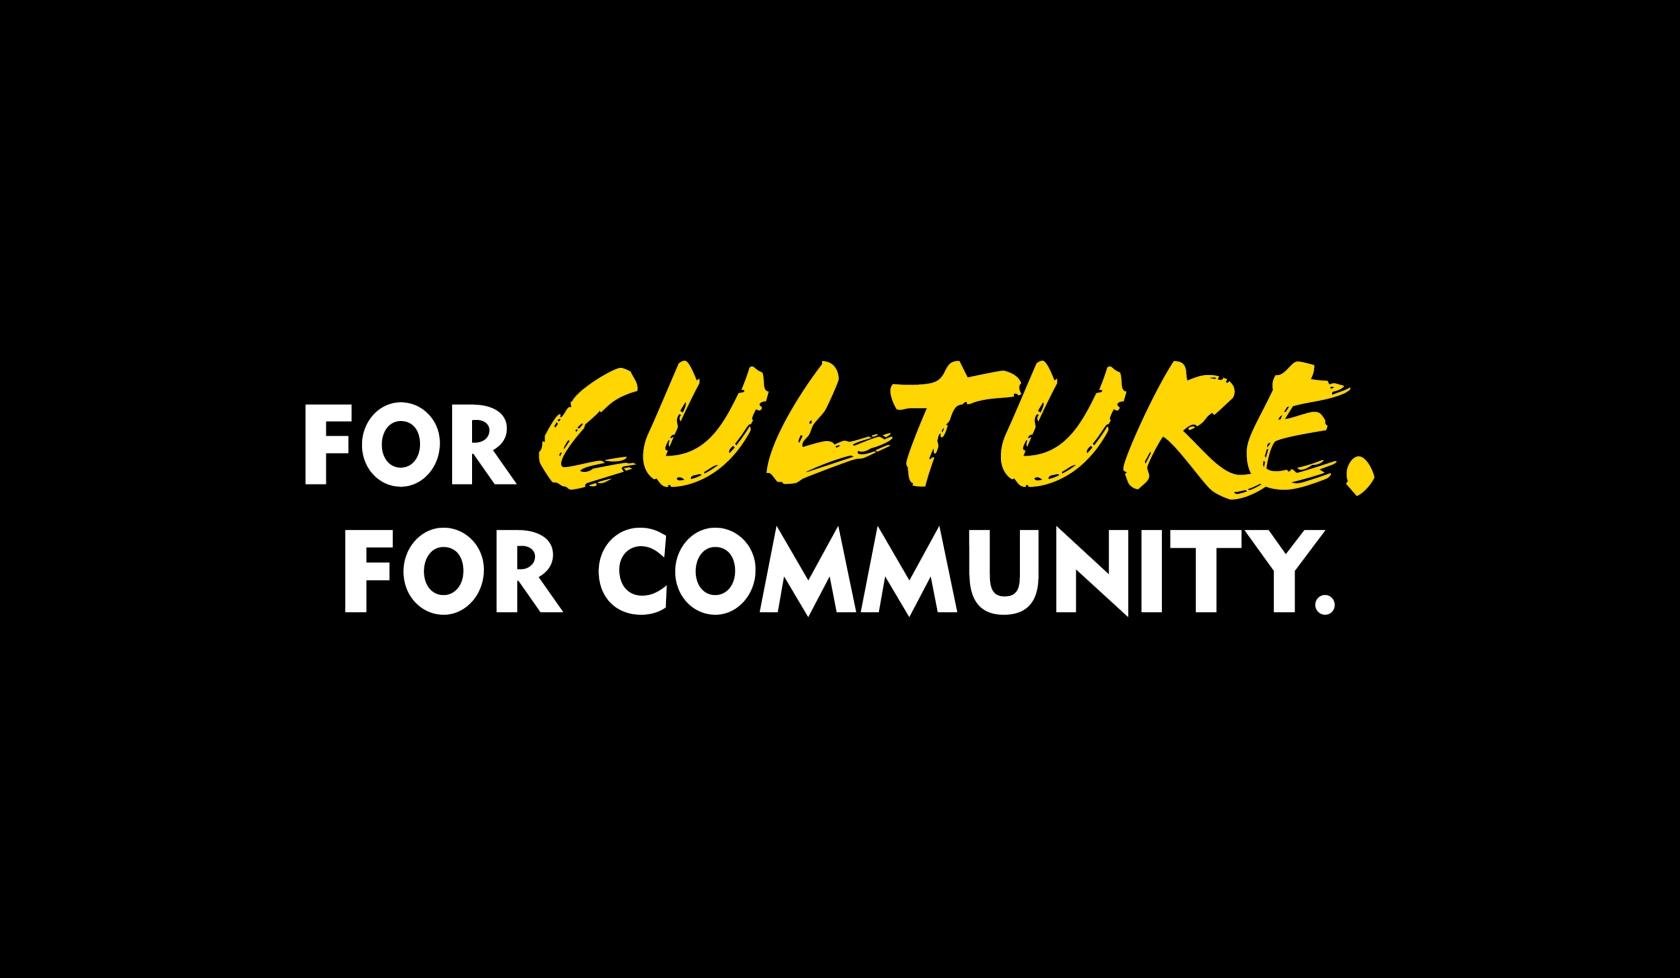 FORCULTURE FOR COMMUNITY